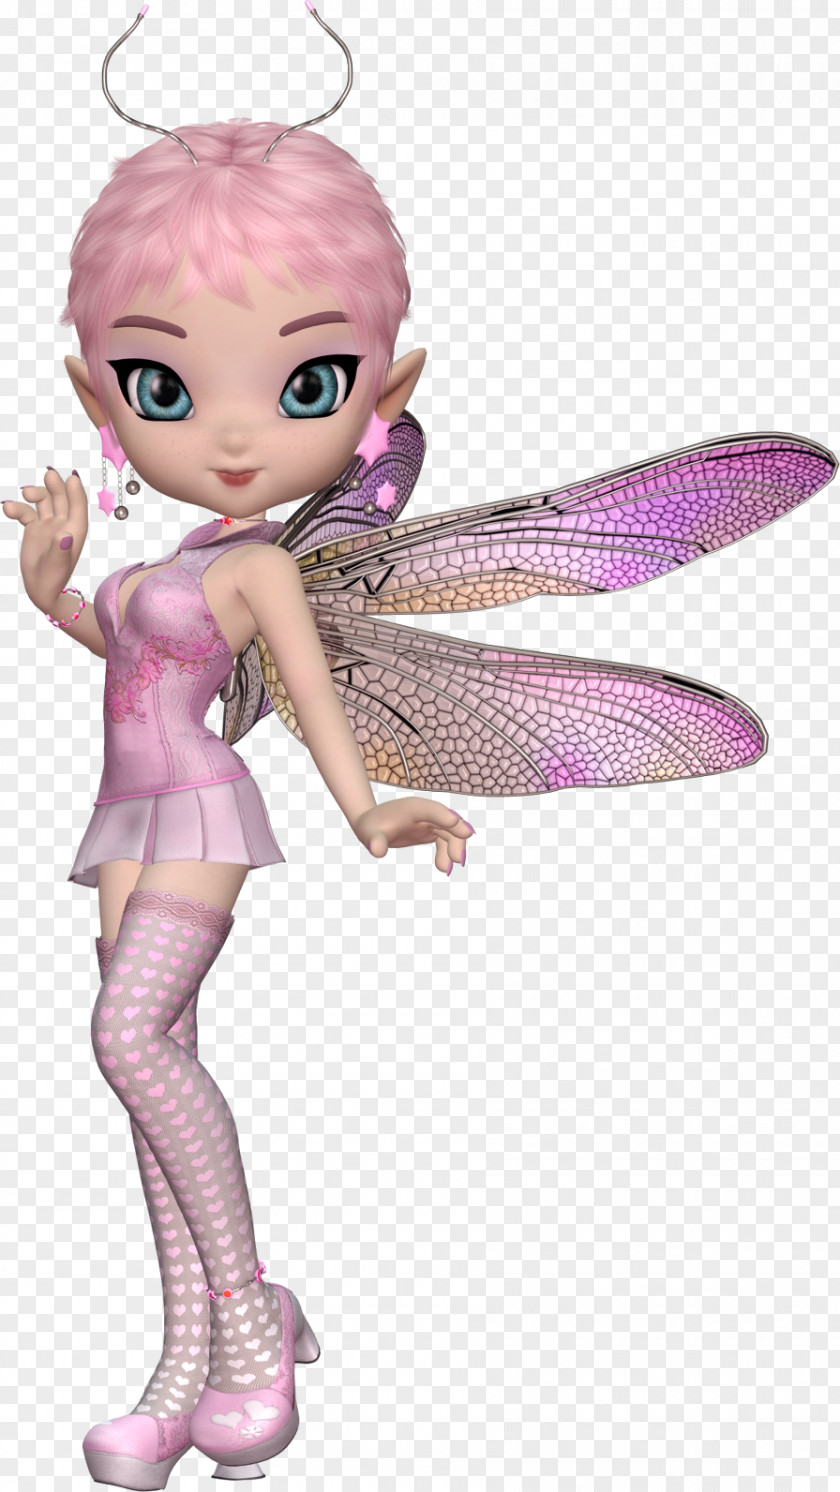 Fairy Biscotti Doll Biscuits PNG